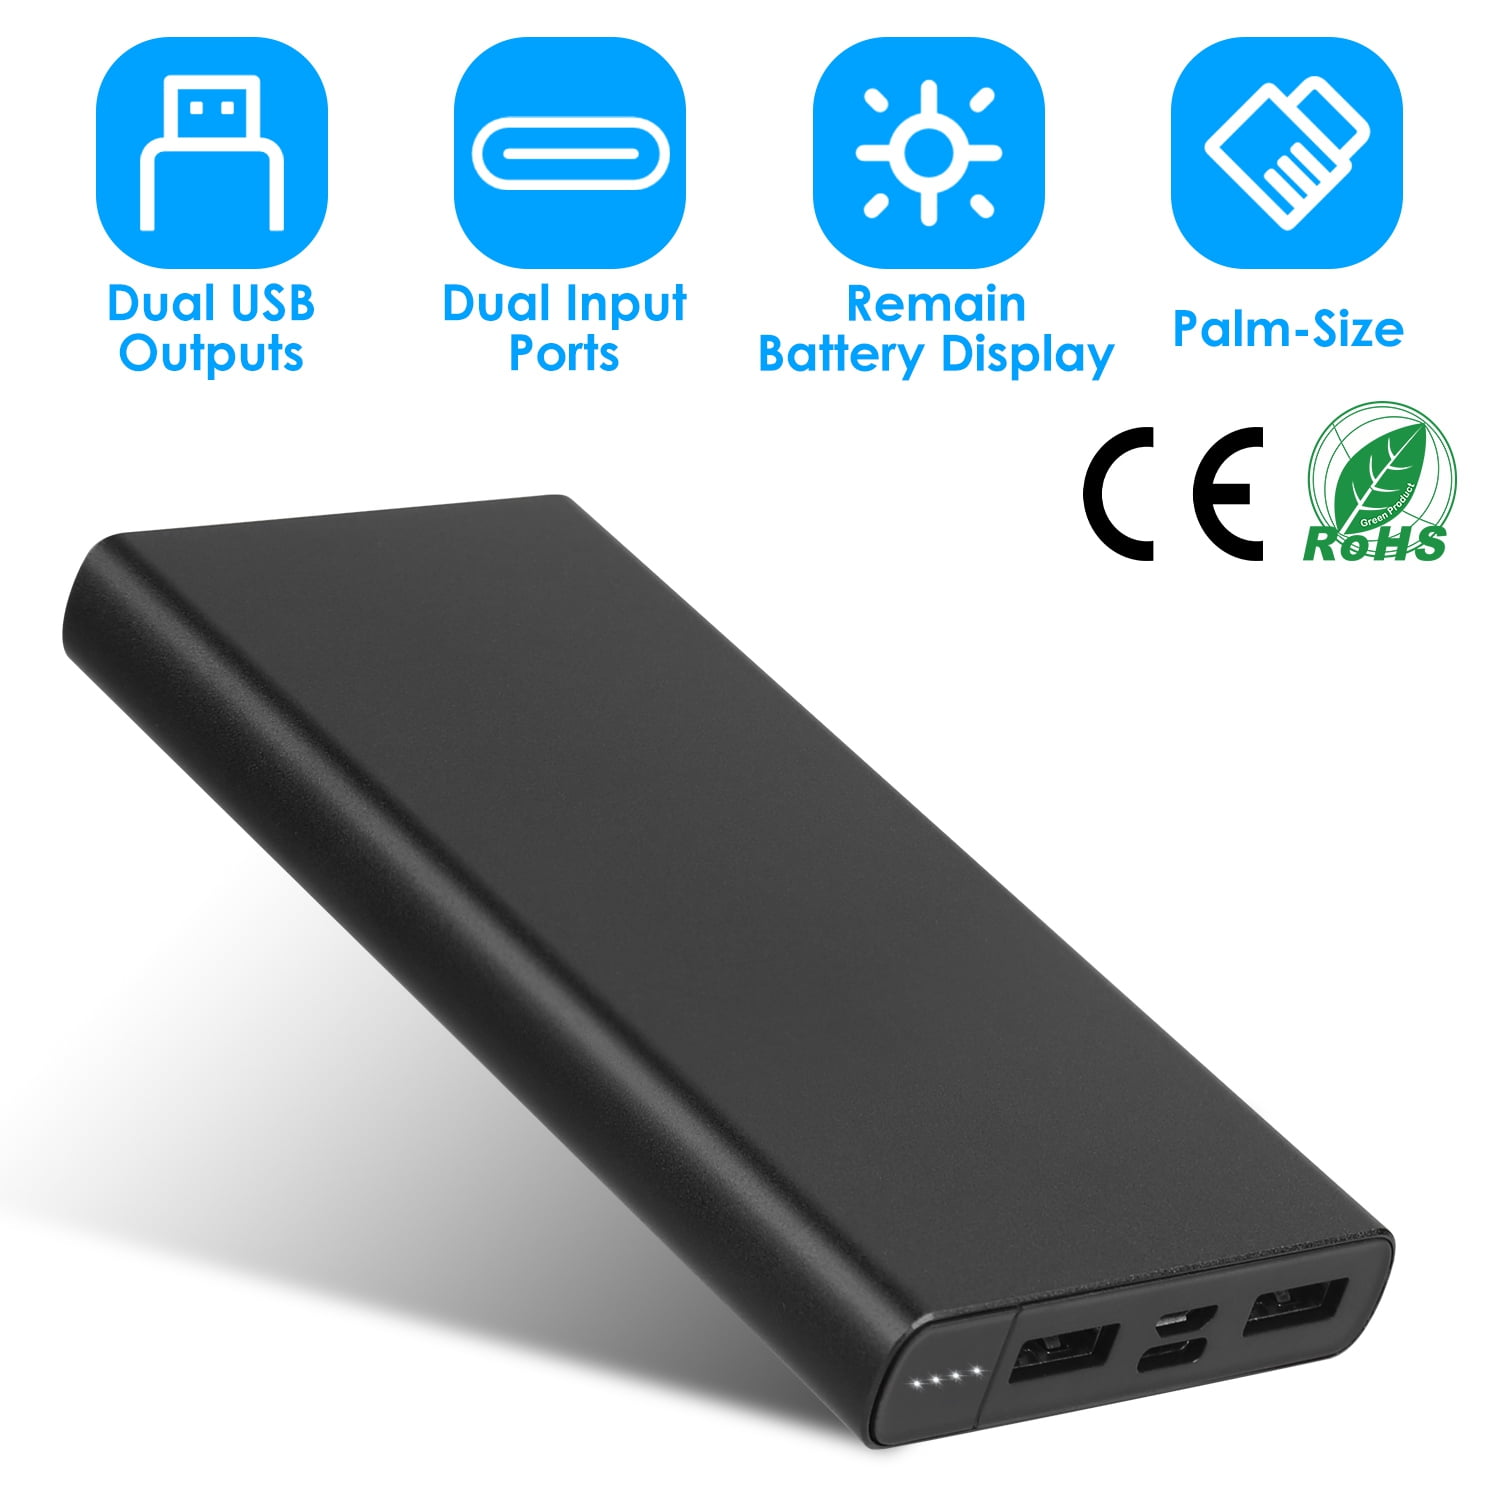 TECKNET Power Bank, 20000mAh Portable Charger with LED Display & 4 Inp